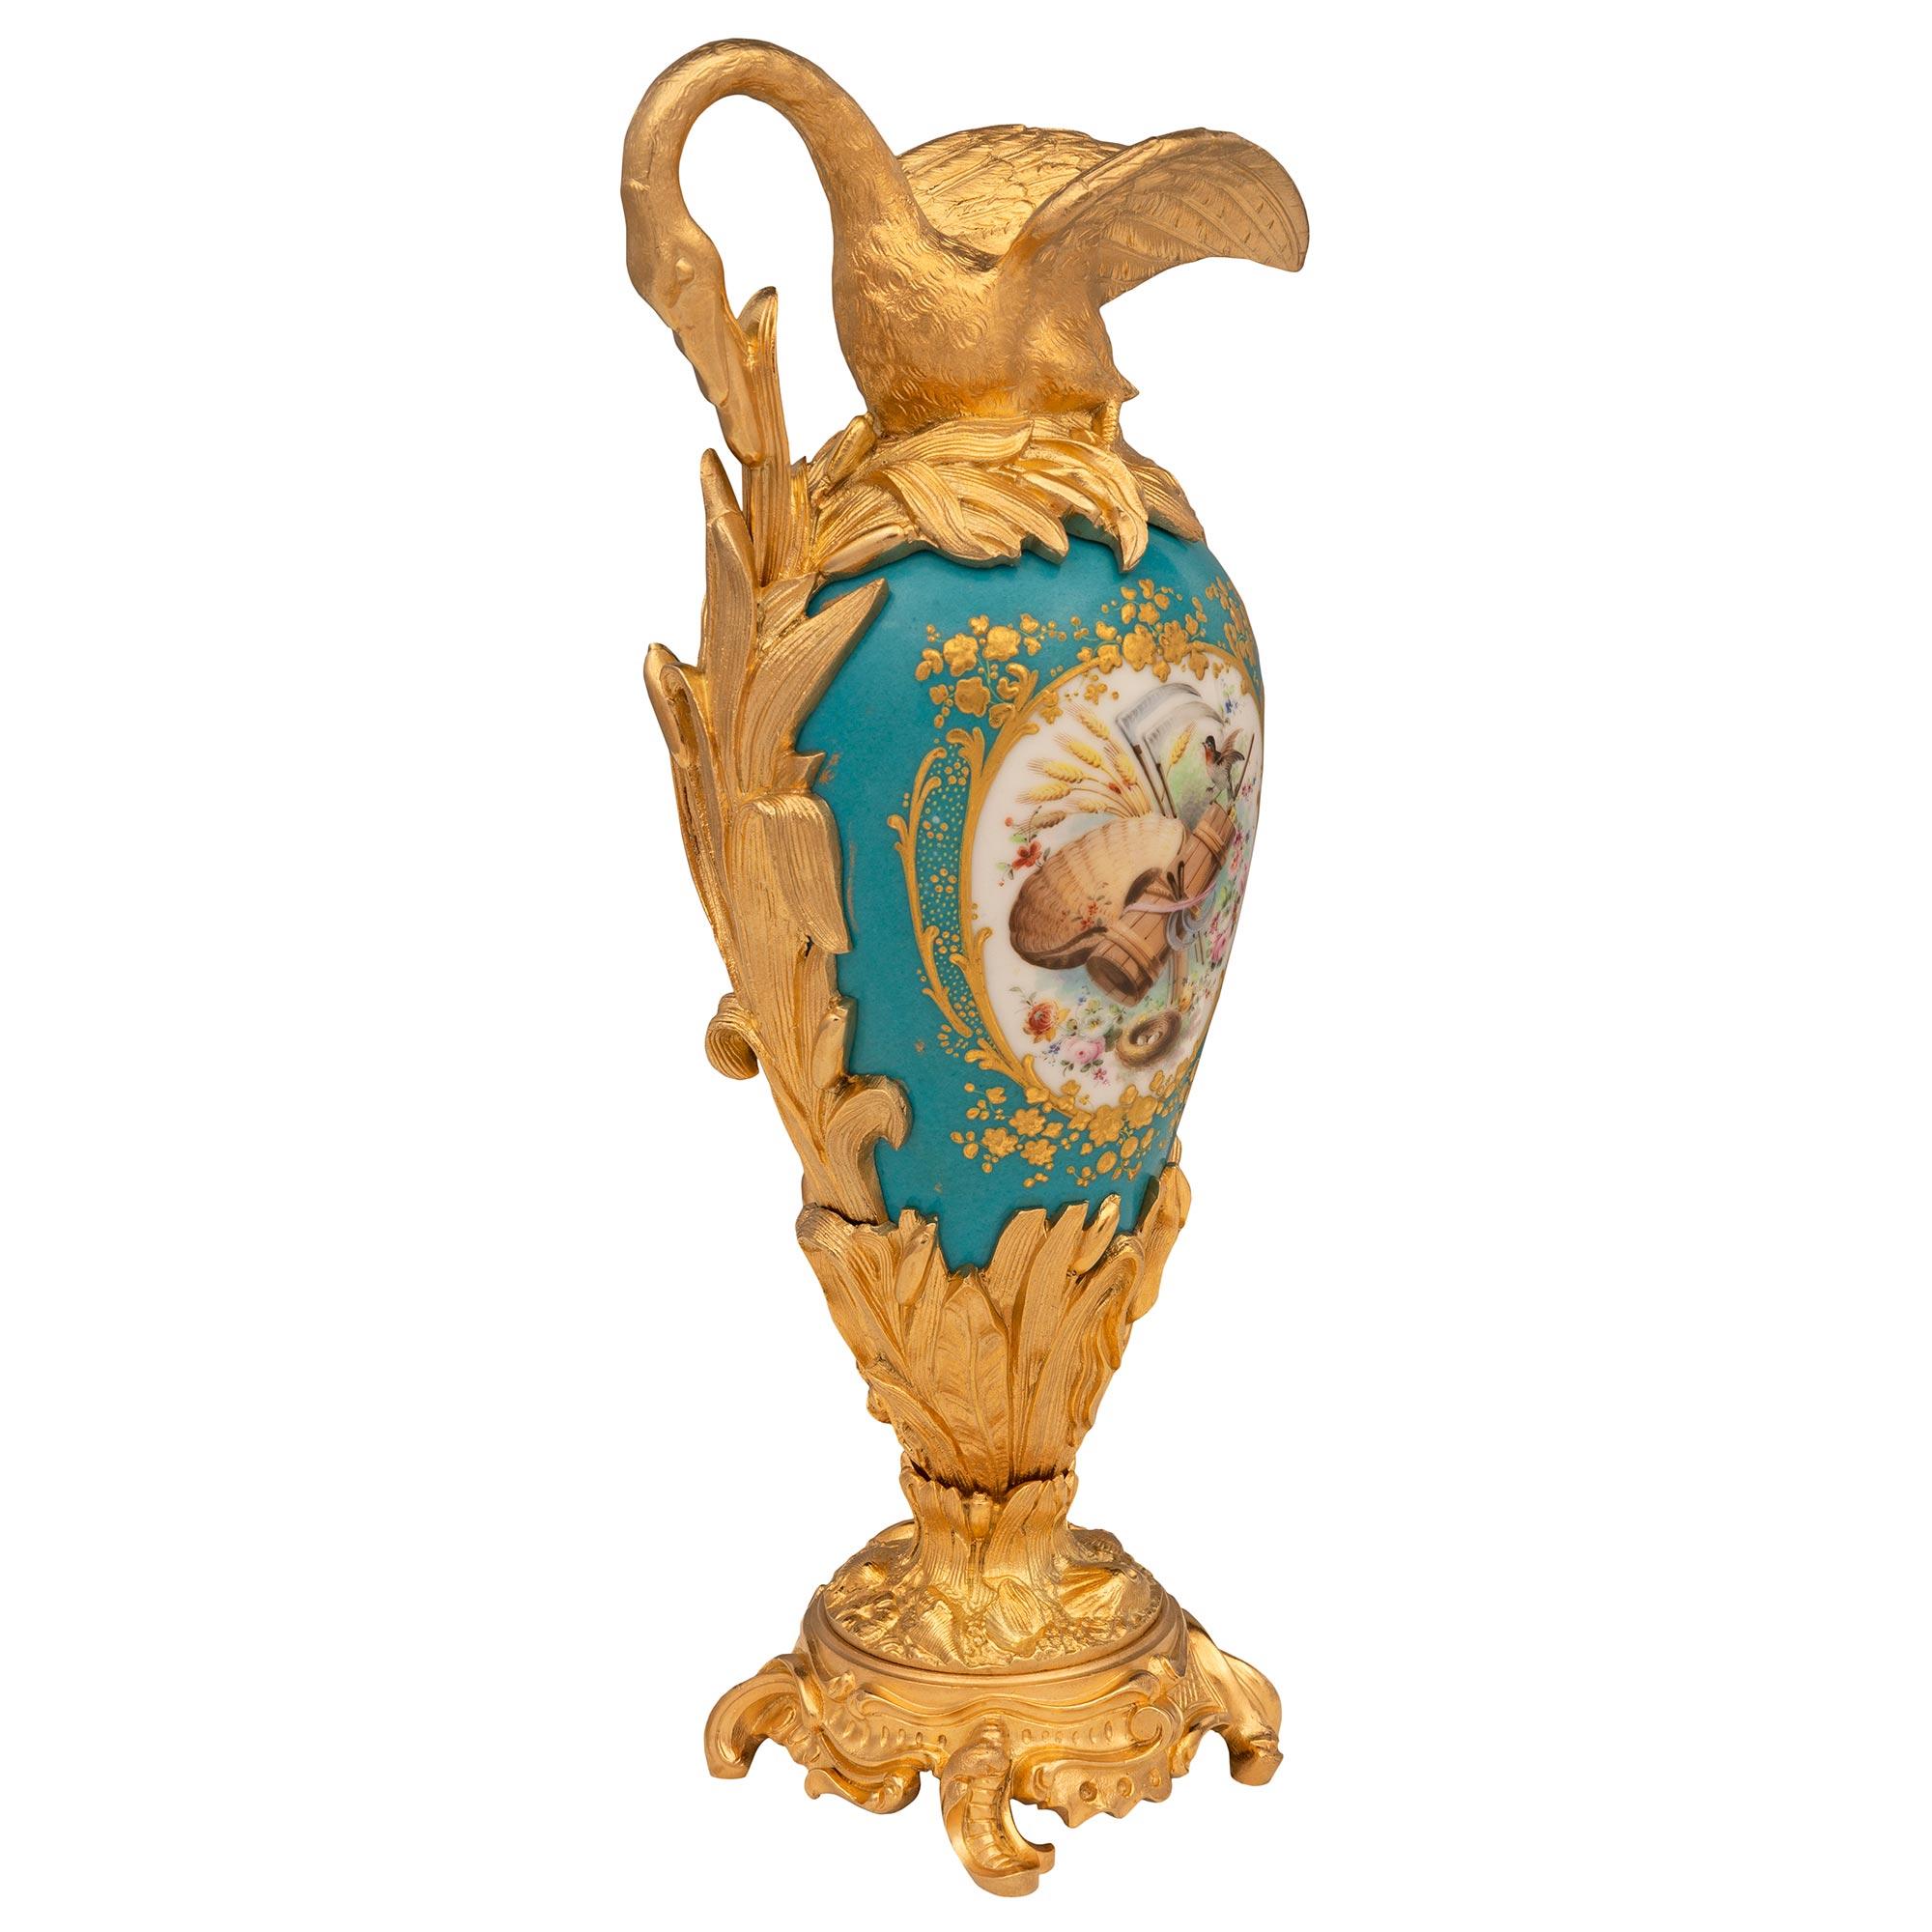 Pair of French 19th Century Louis XVI St. Sèvres Porcelain and Ormolu Ewers In Good Condition For Sale In West Palm Beach, FL